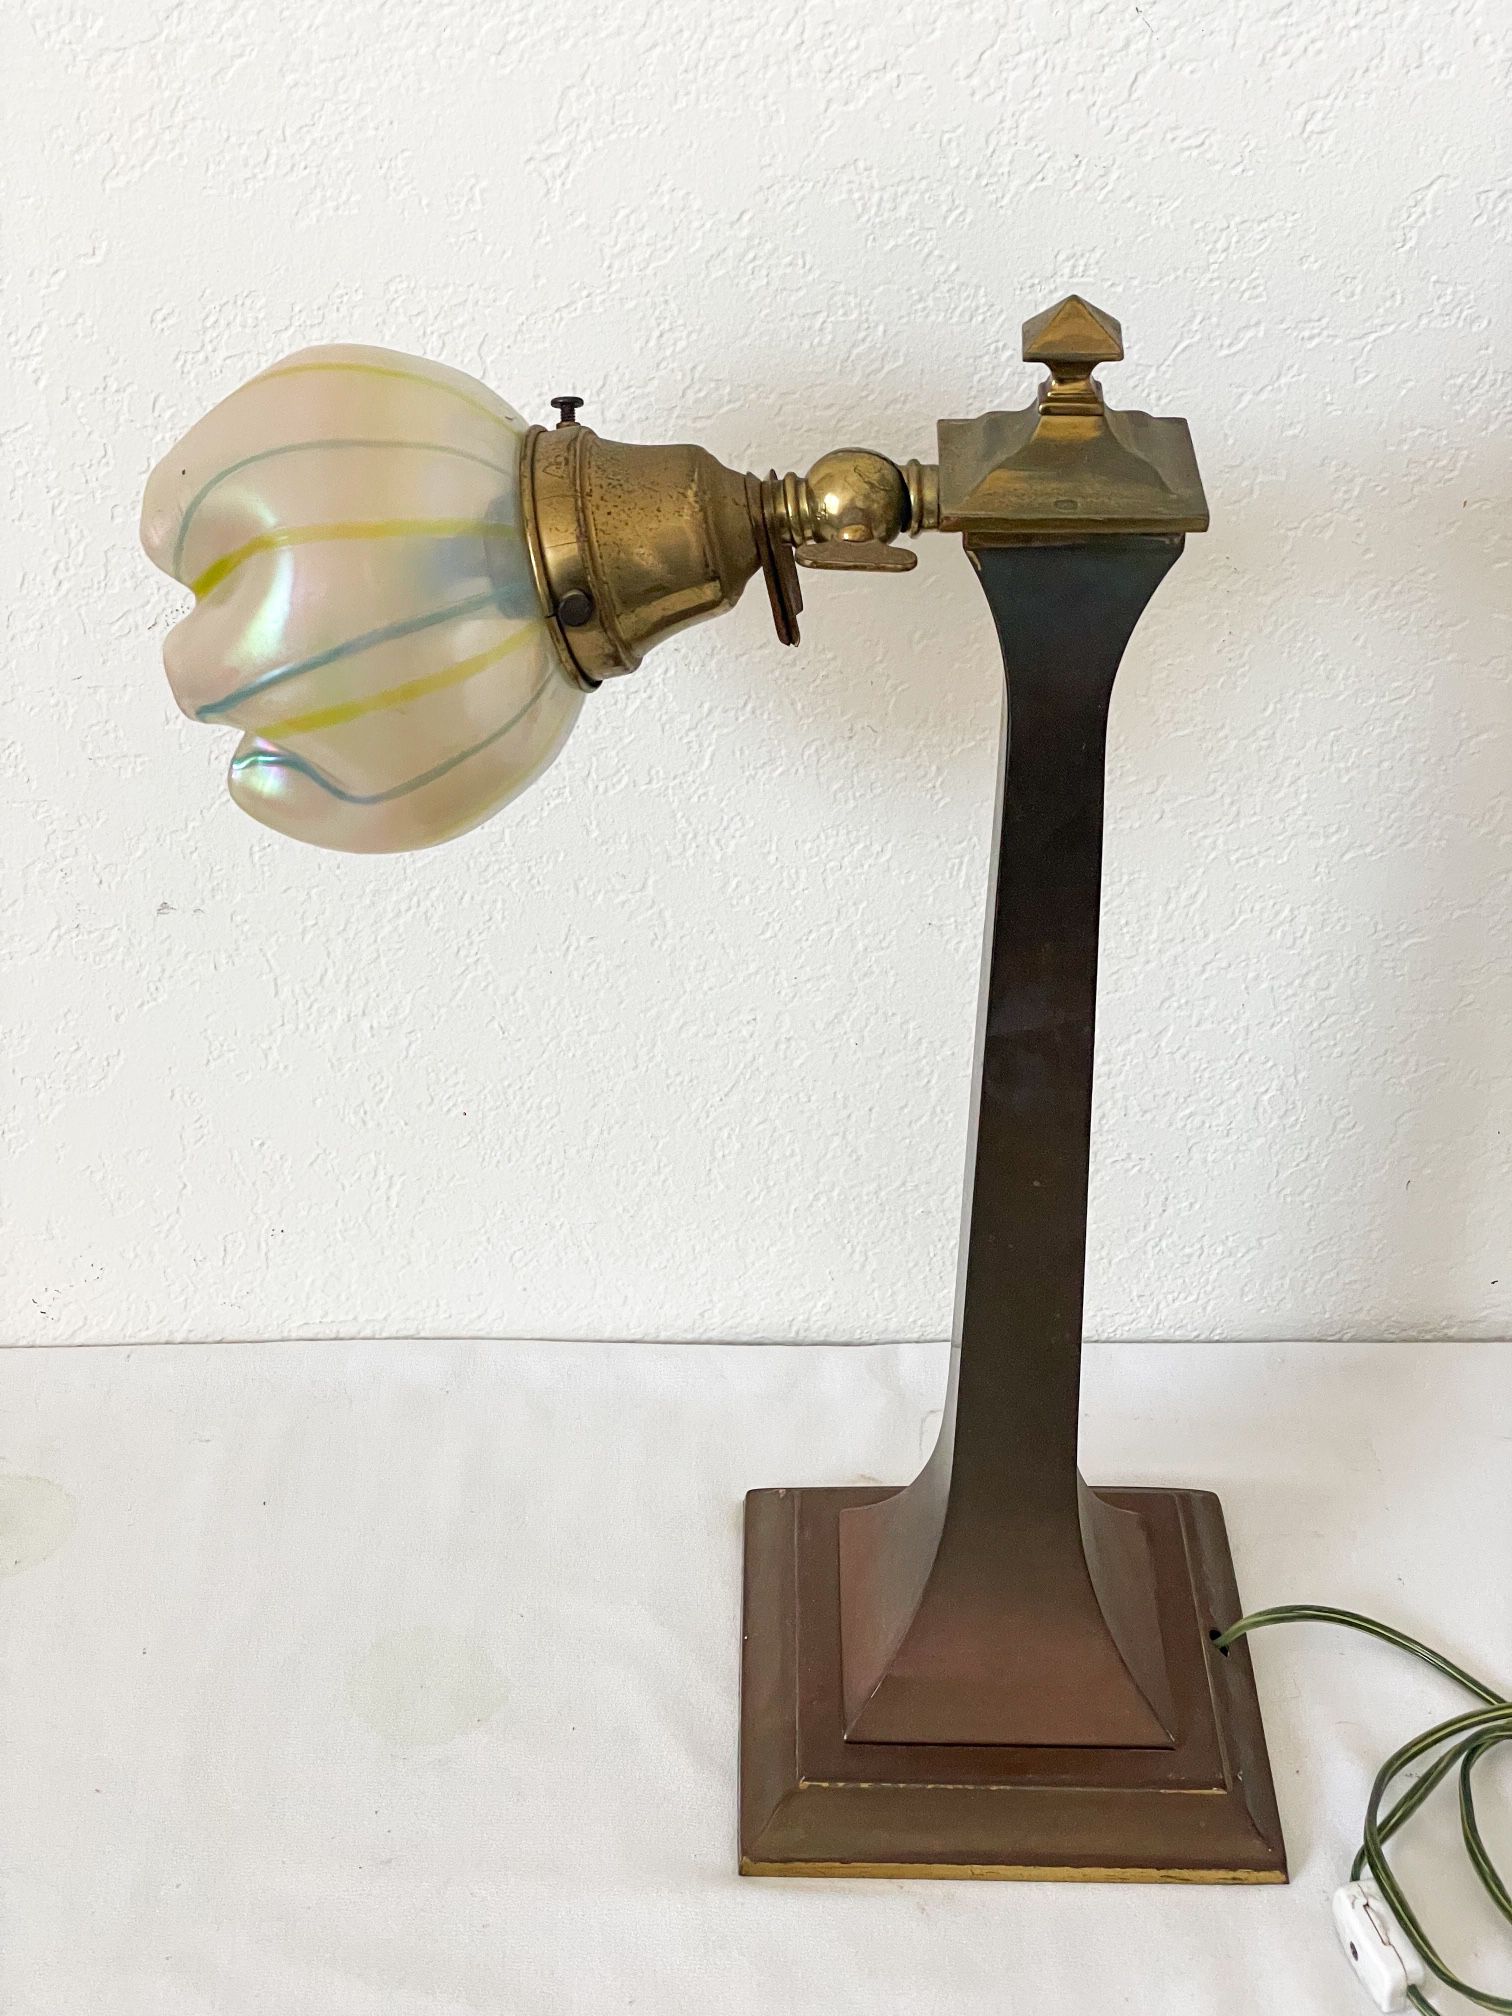 Rare Amronlite 1920’s Art Deco Desk Lamp With Candy Ruffled Blown Glass Shade